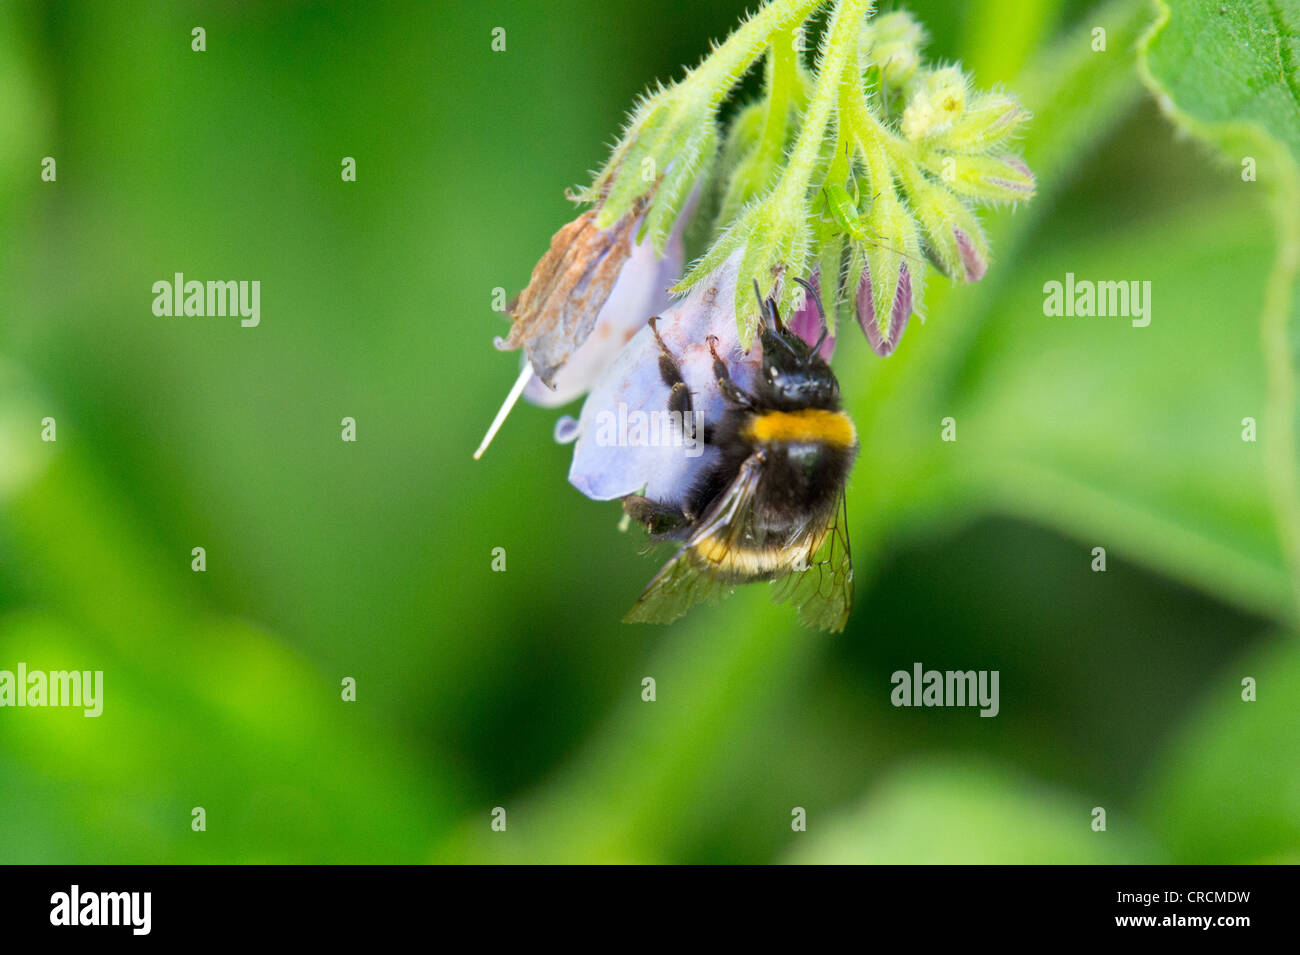 Bumblebees drinking nectar from flowers Stock Photo